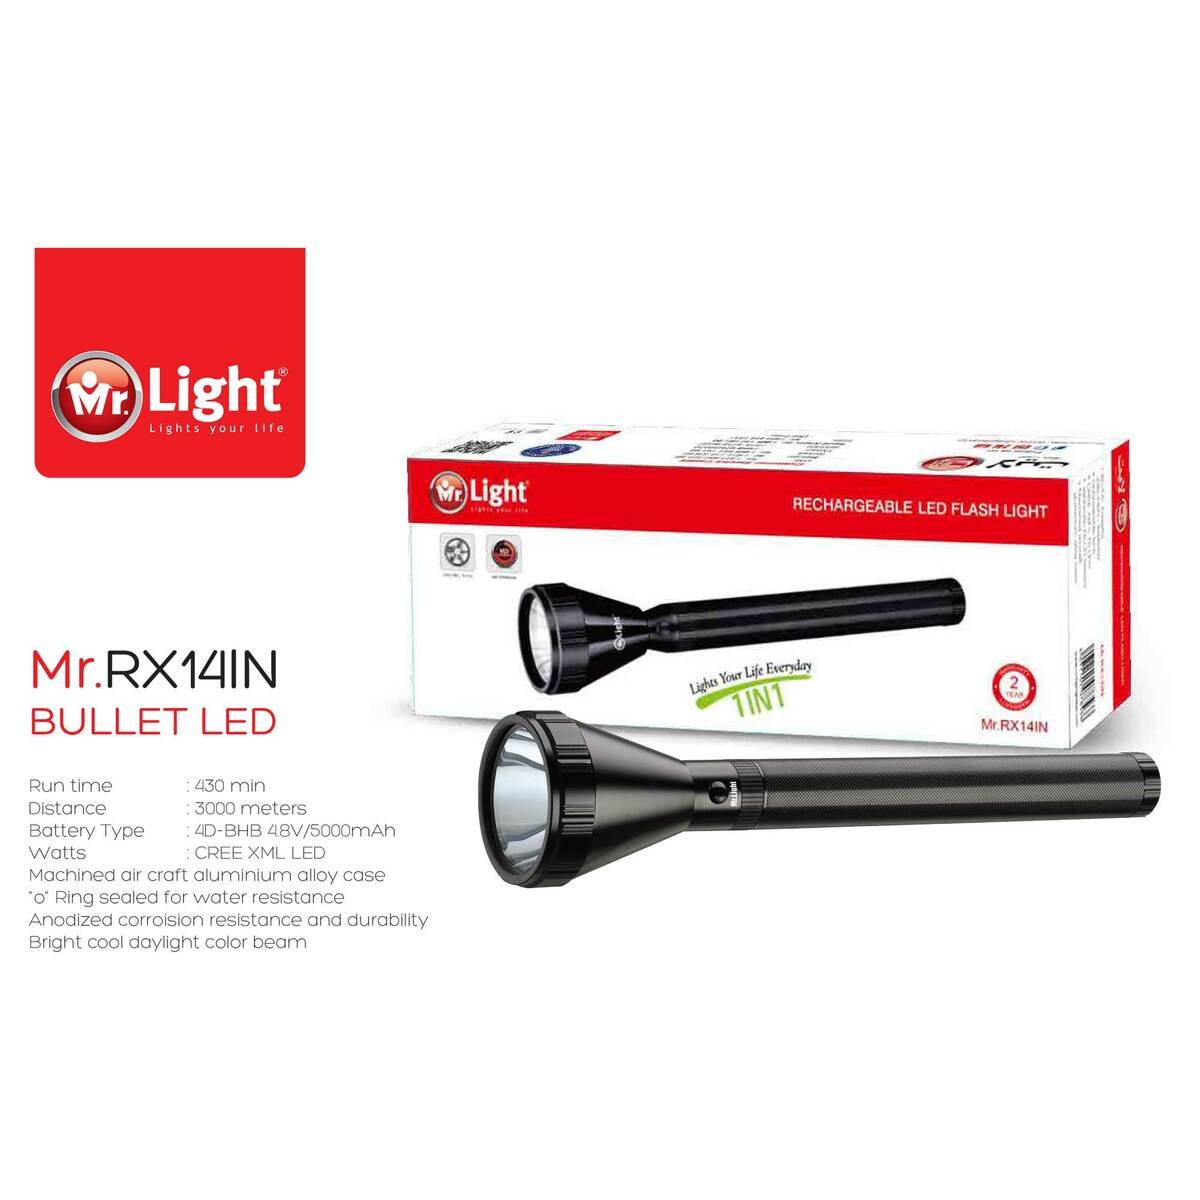 Mr.Light Rechargeable LED Flashlight Mr.RX14IN